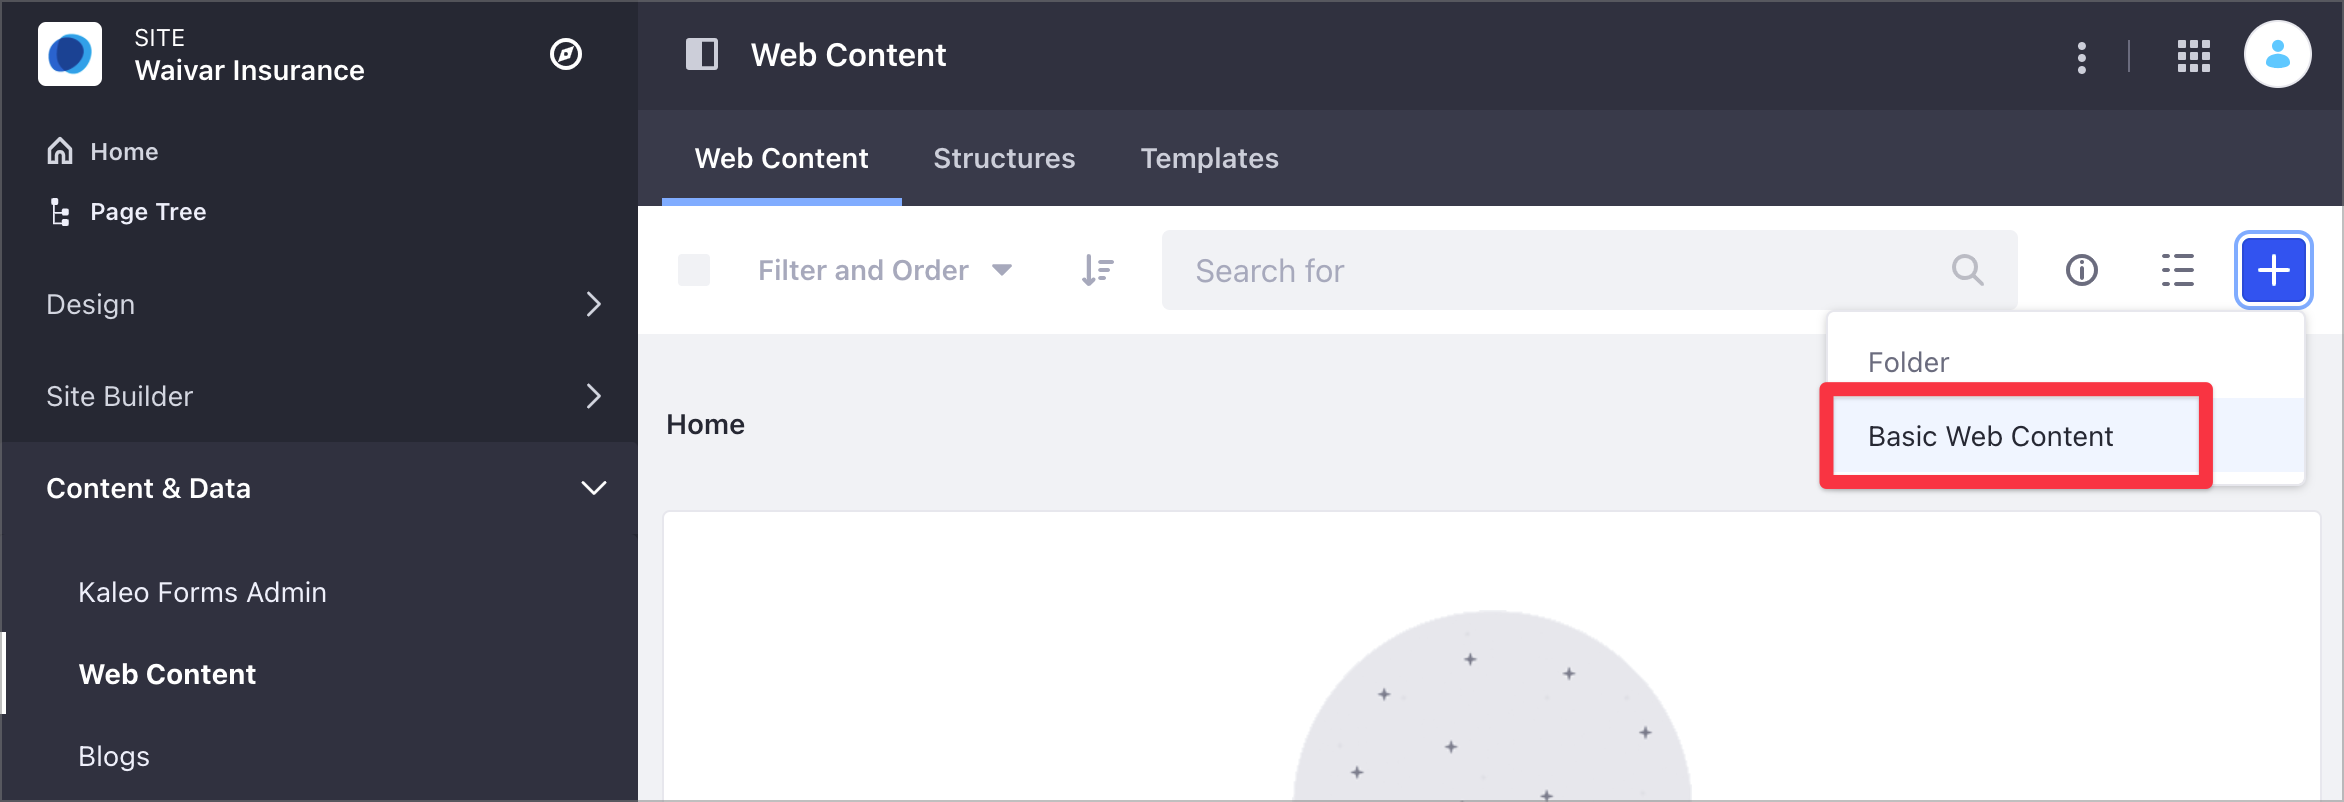 Create a Basic Web Content Article from the Web Content Panel.